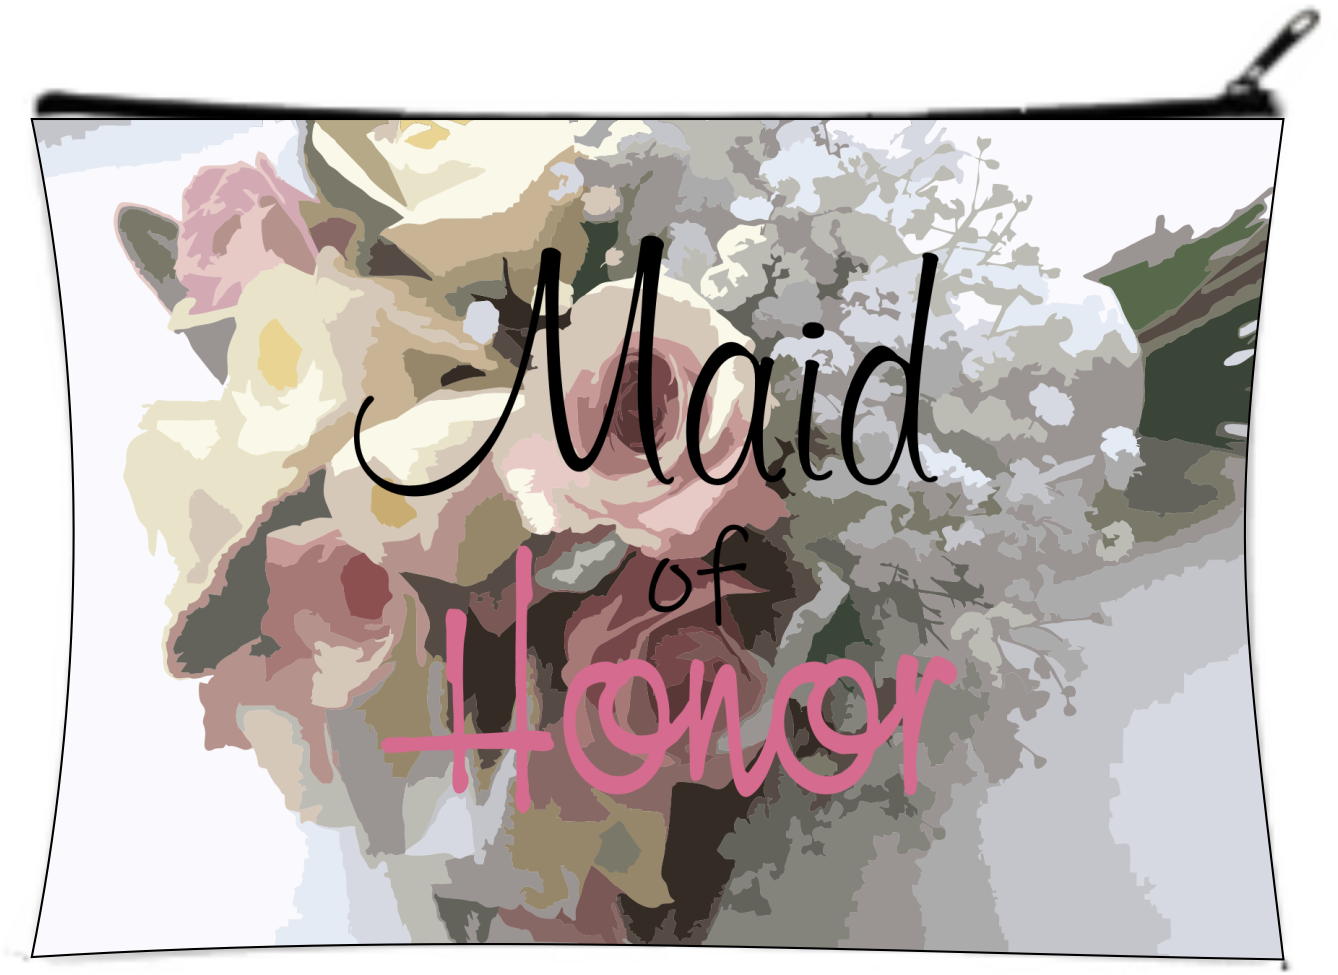 Maid of Honor - Flowers